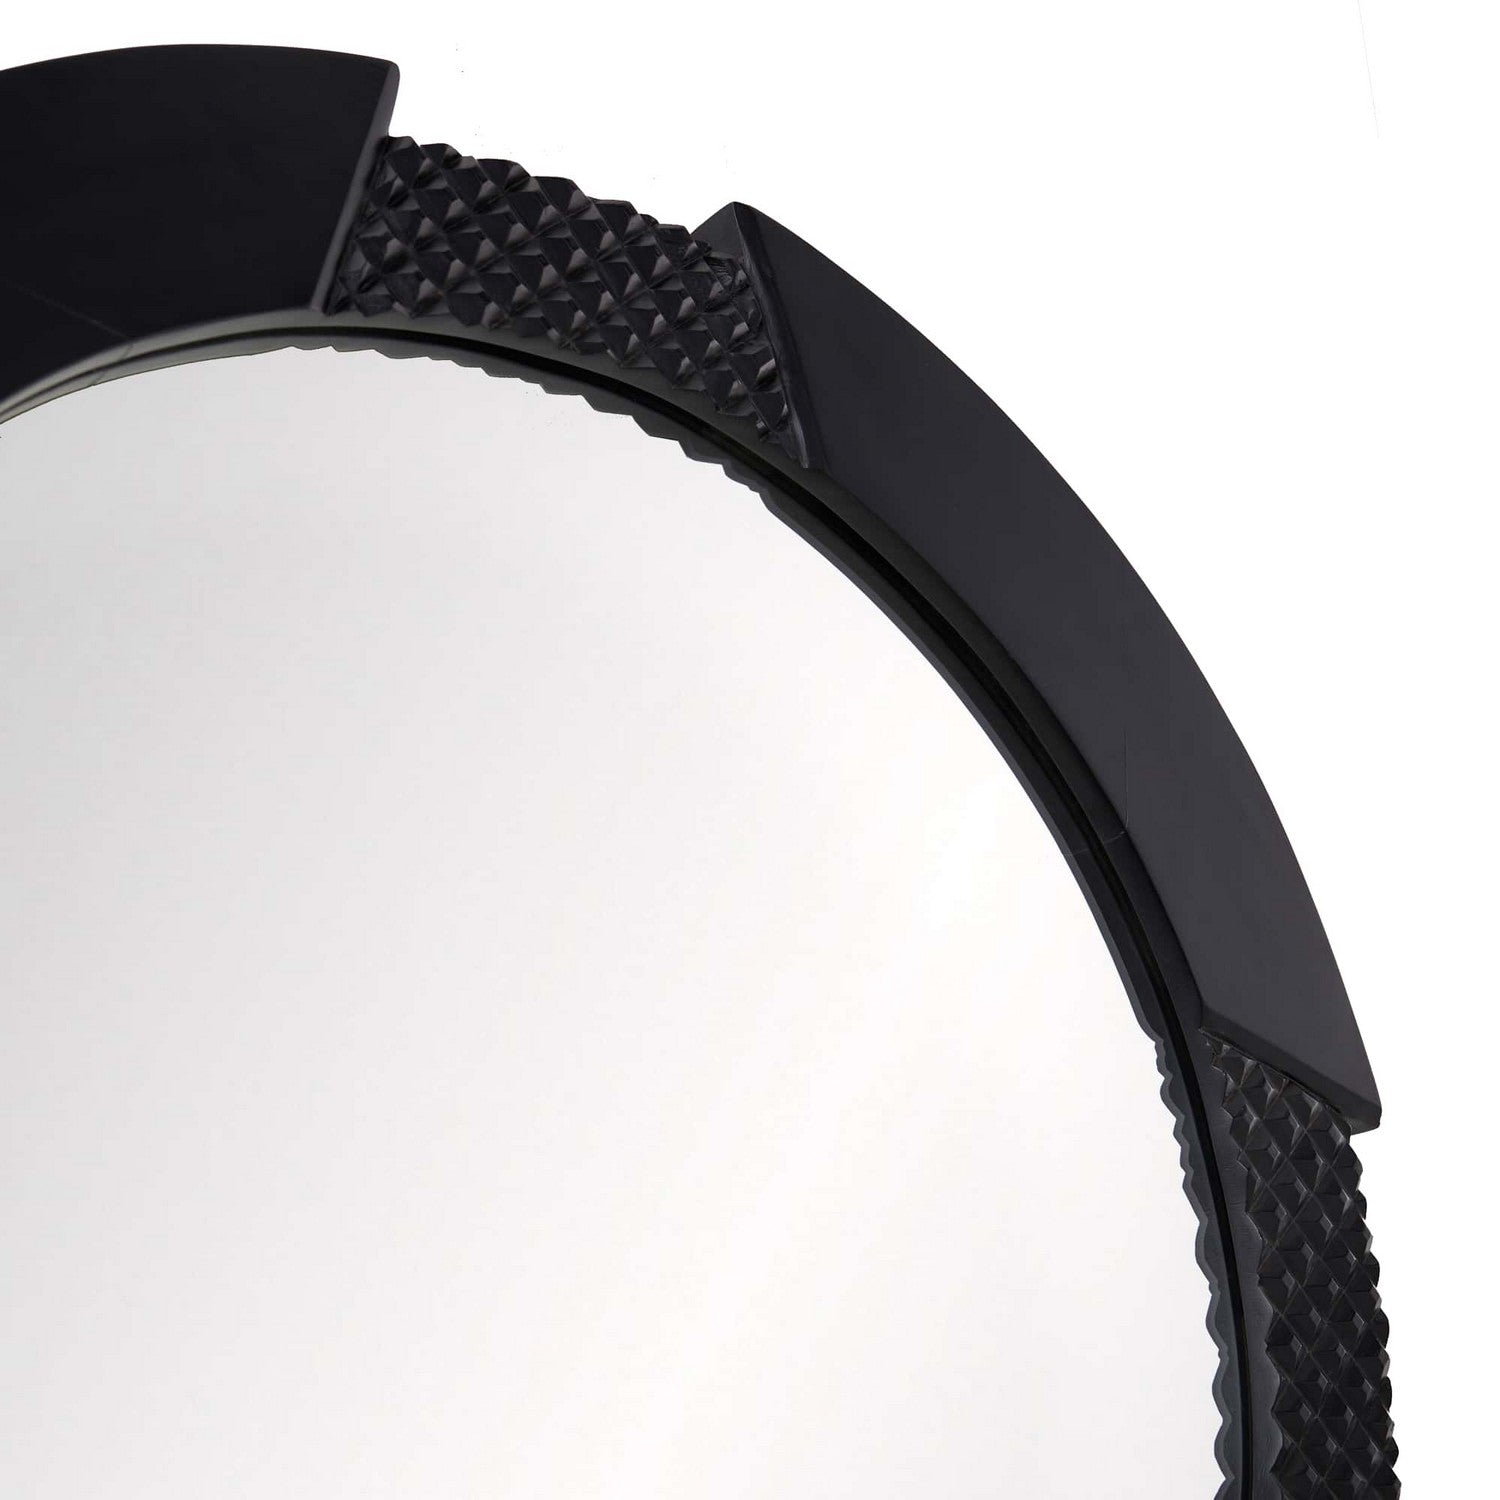 Mirror from the Tanja collection in Ebony finish